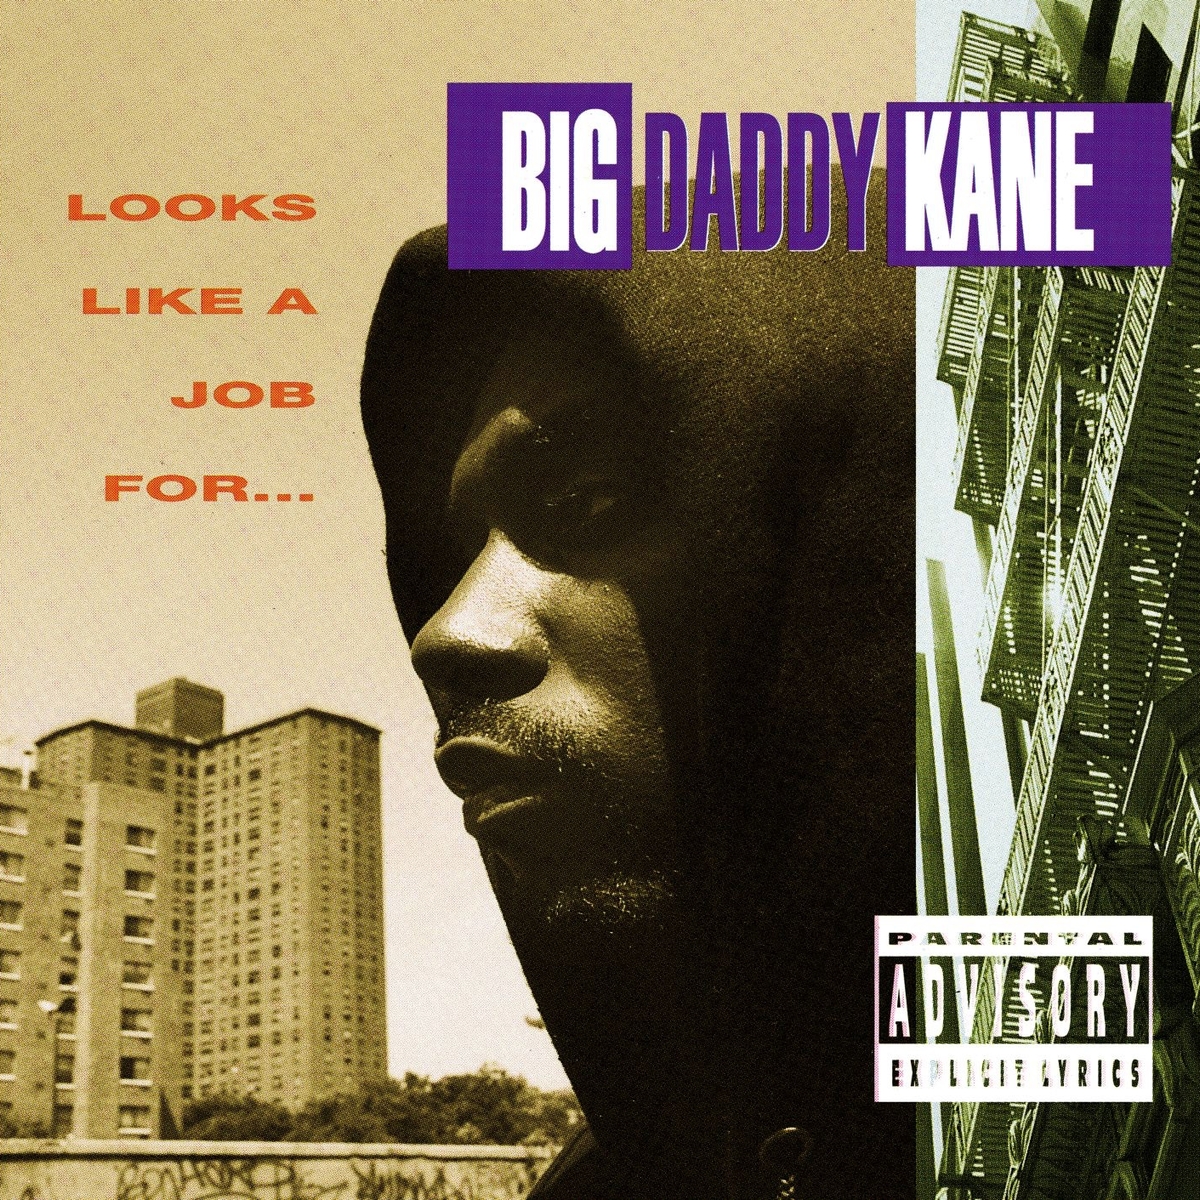 audio review : Looks Like A Job For ( album ) ... Big Daddy Kane